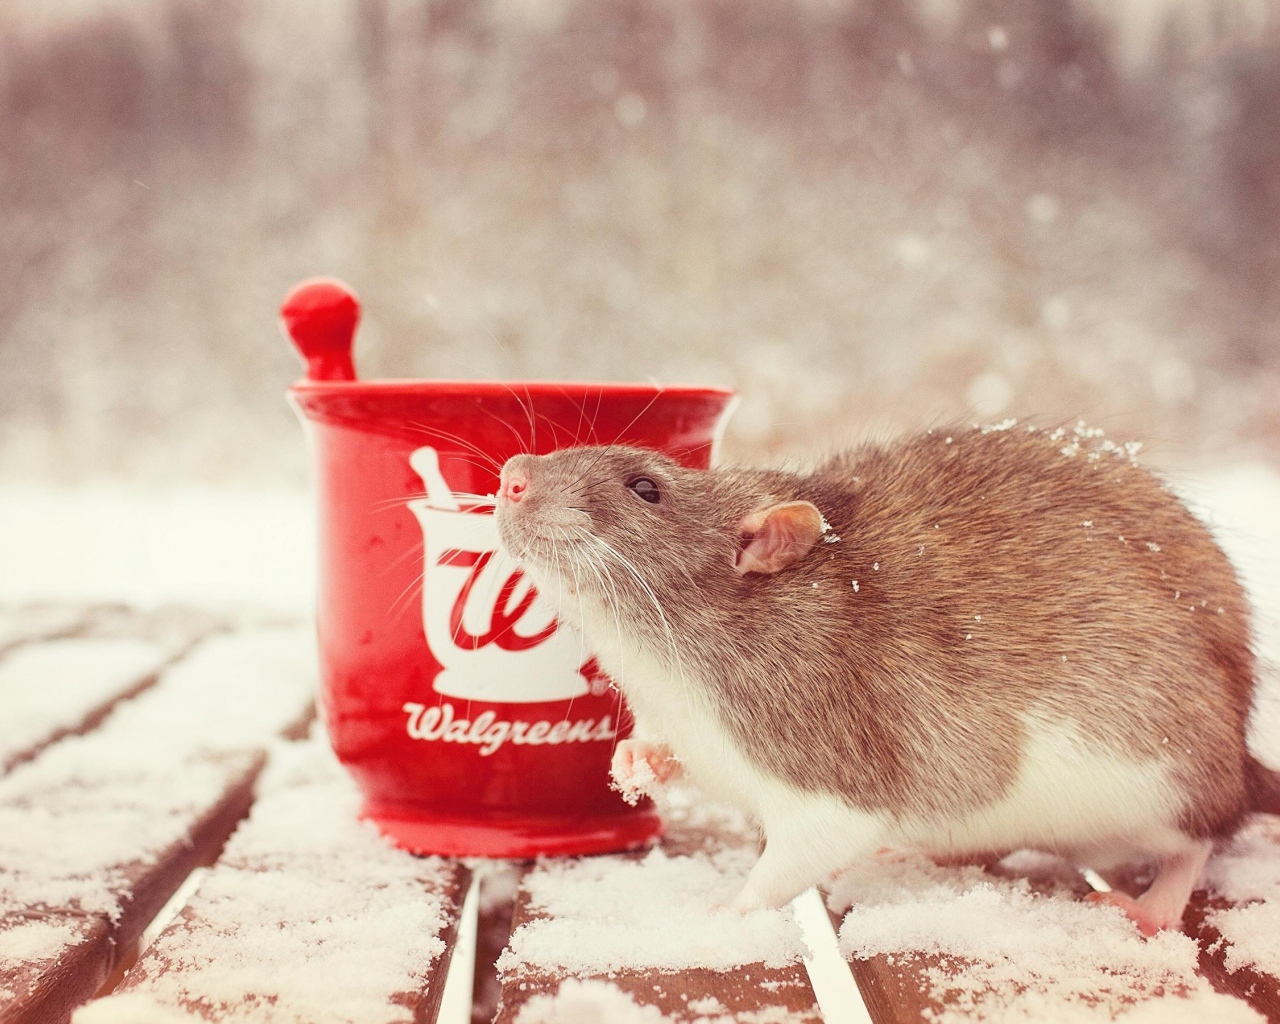 Rat with a cup of tea in the snow, a symbol of the new year 2020